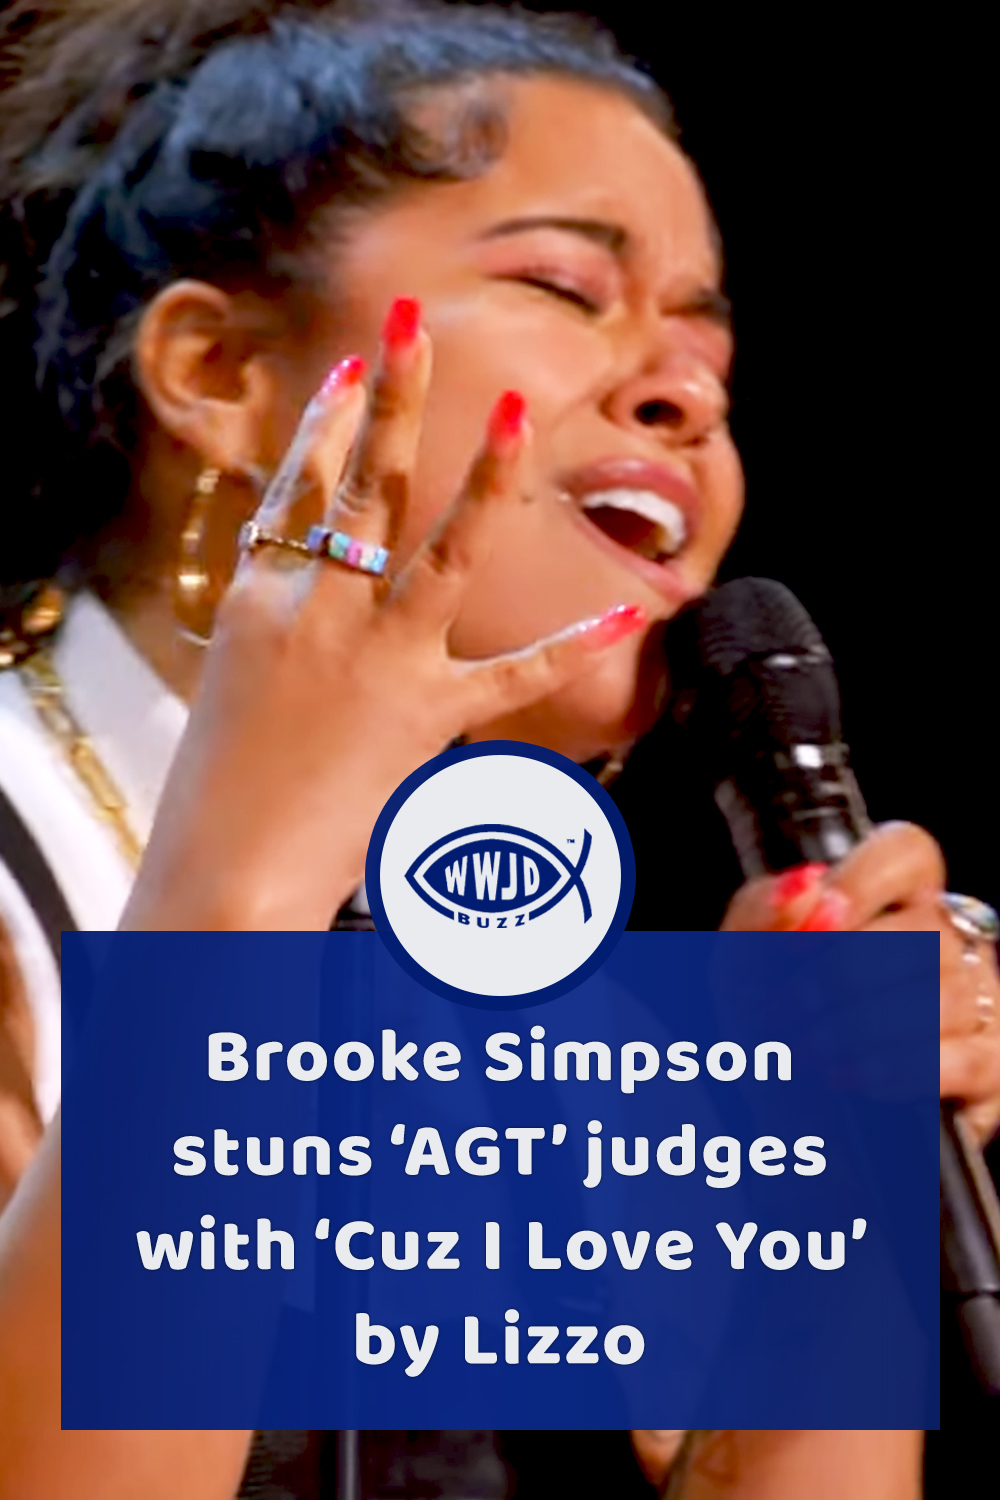 Brooke Simpson stuns ‘AGT’ judges with ‘Cuz I Love You’ by Lizzo